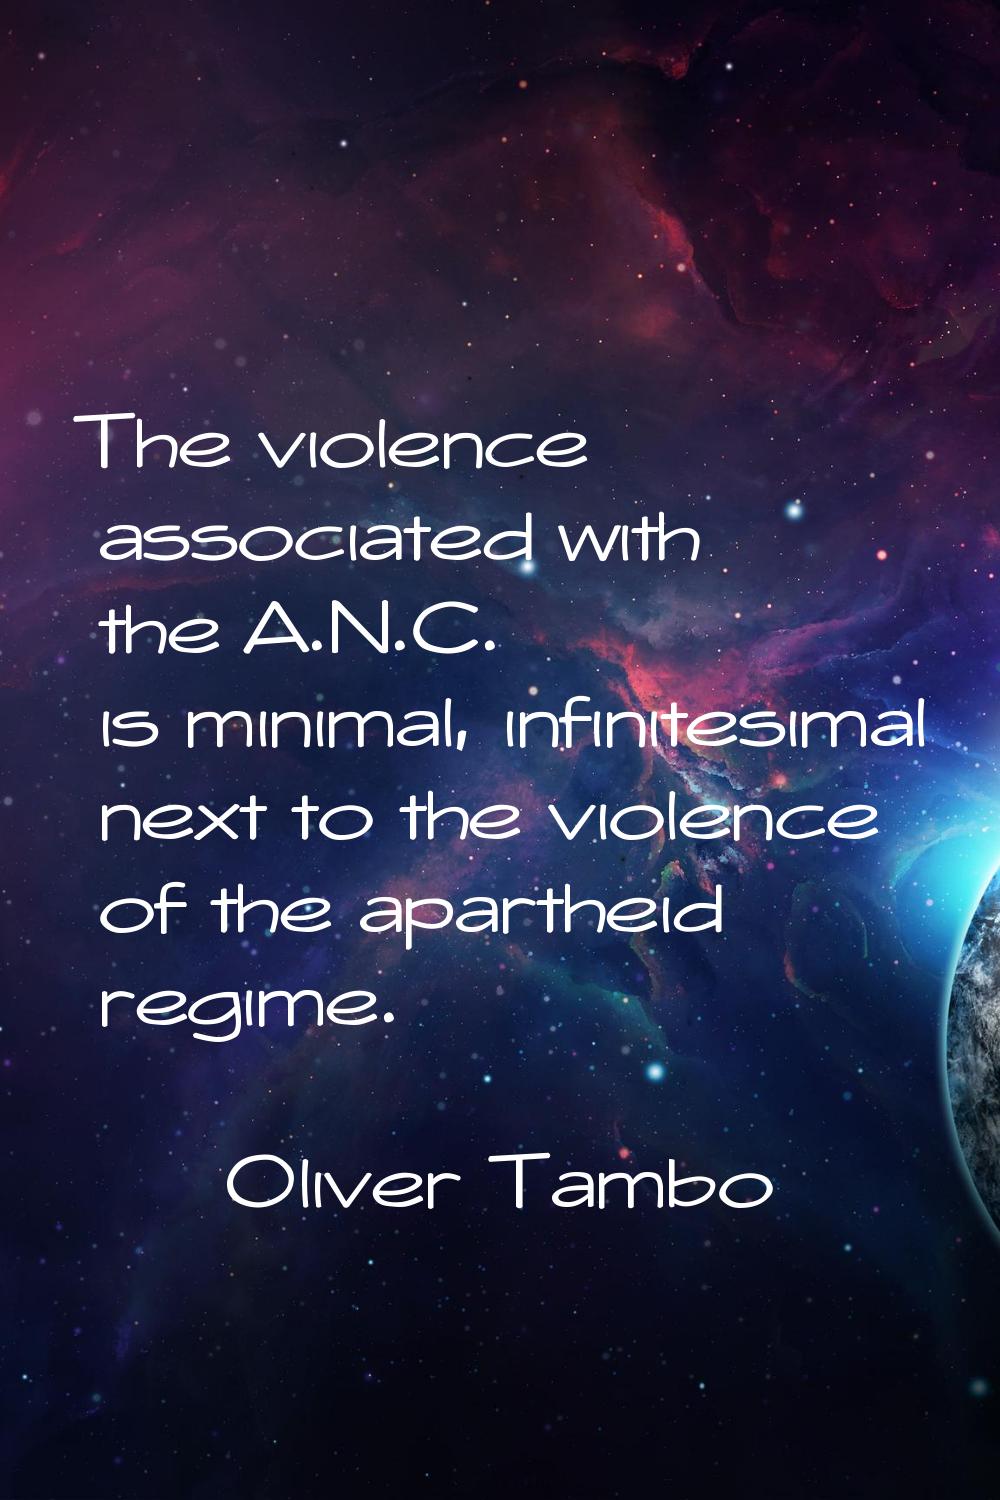 The violence associated with the A.N.C. is minimal, infinitesimal next to the violence of the apart